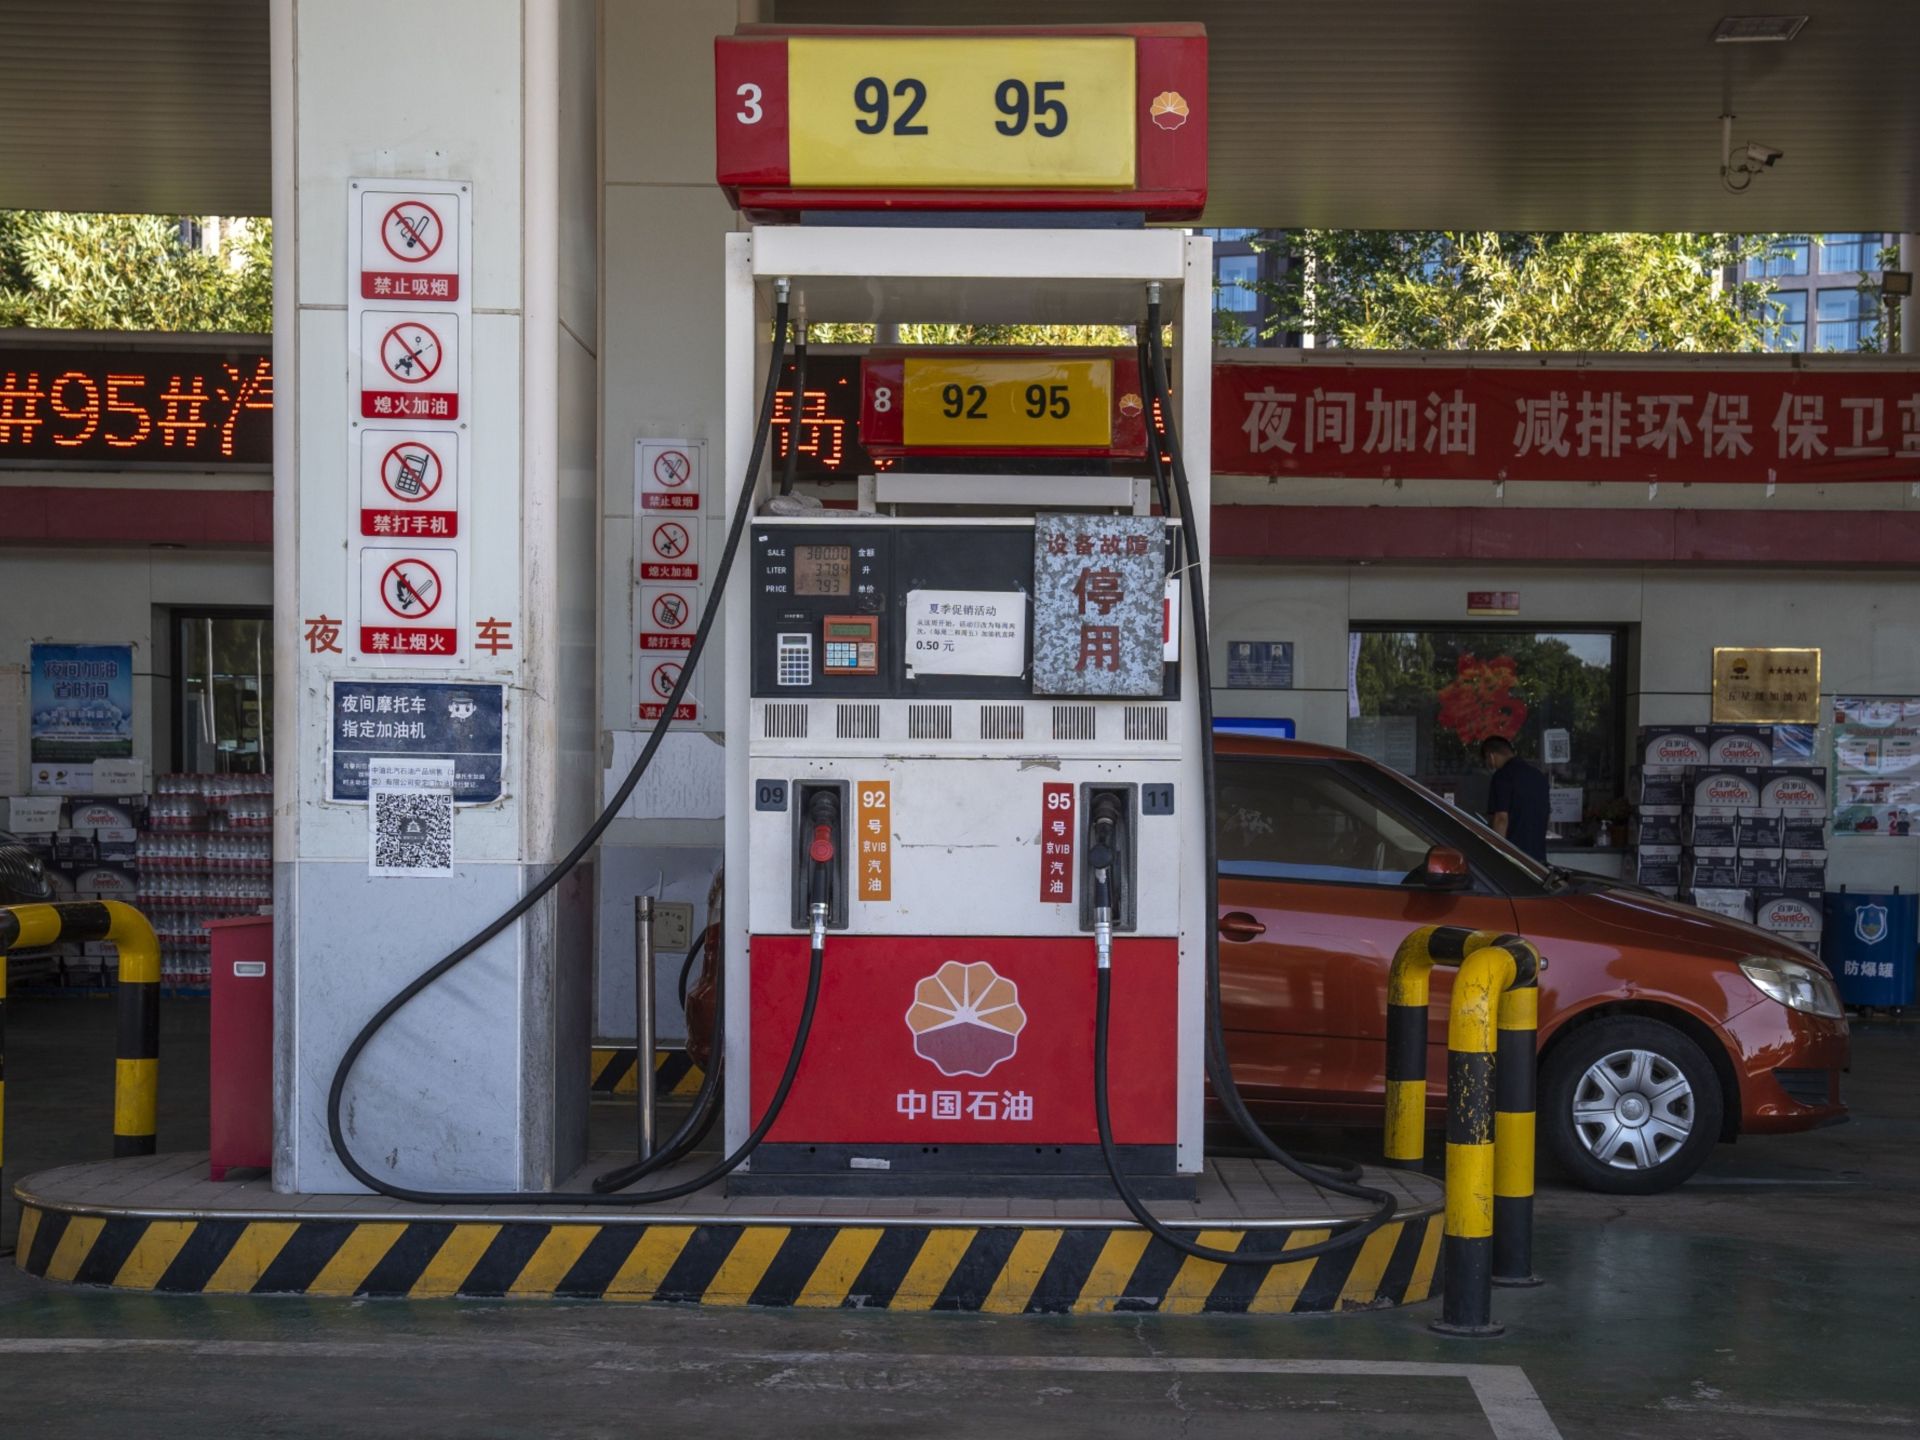 China’s oil giants post record profits on surging fuel prices